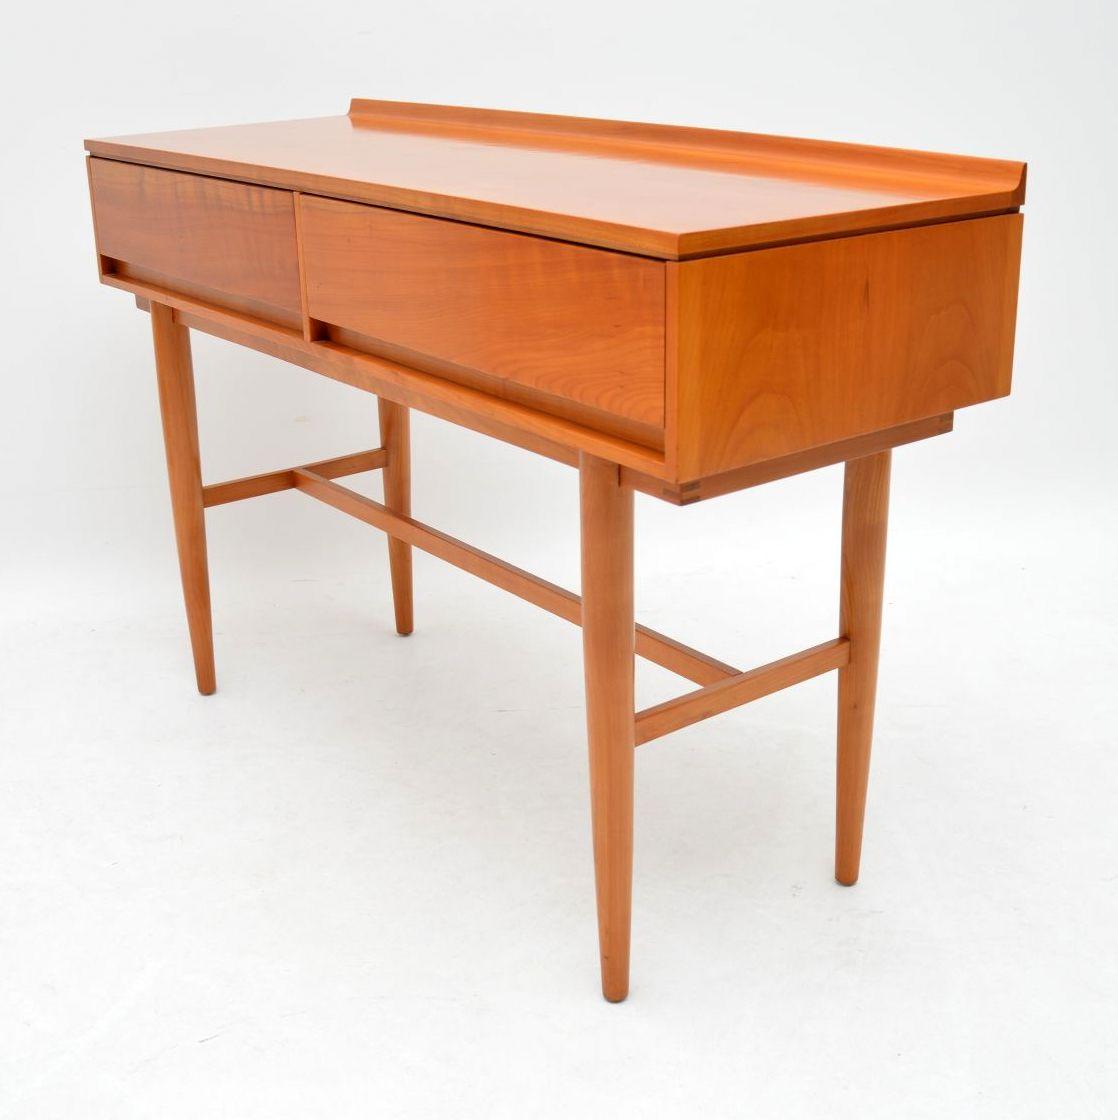 English 1960's Vintage Satin Wood Side Table by Beresford & Hicks For Sale